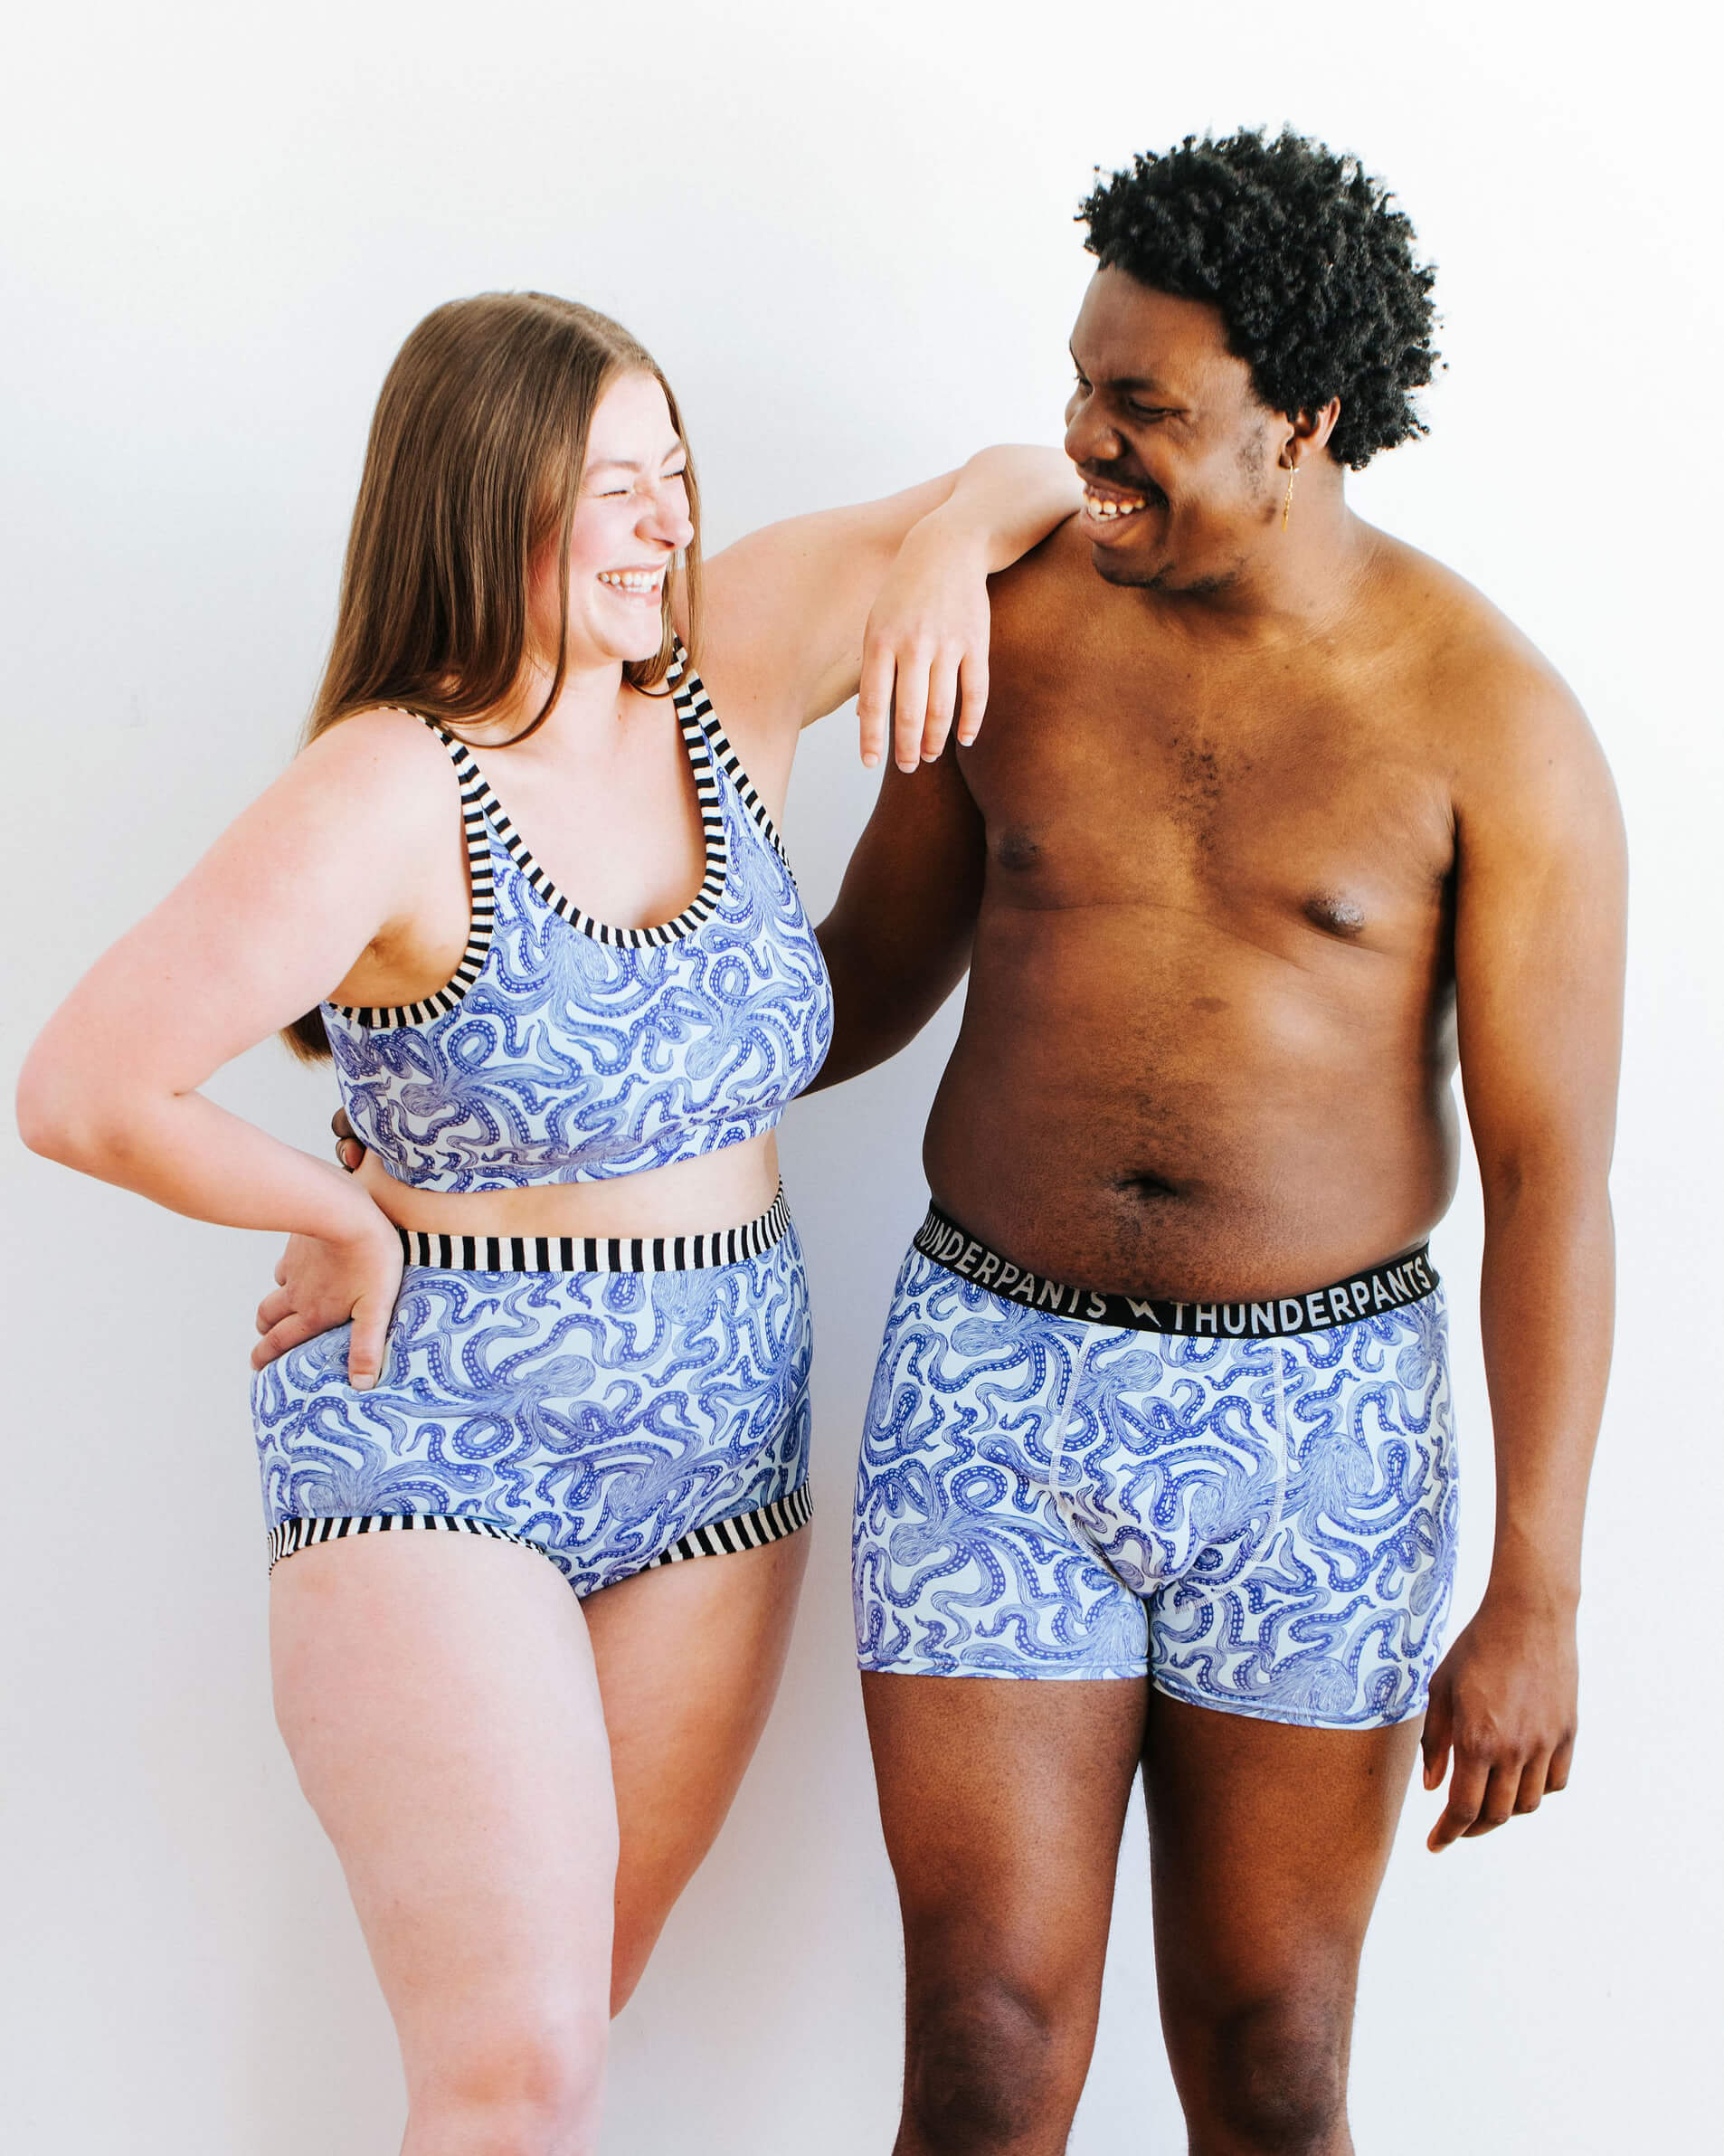 Two models wearing various Thunderpants styles in Octopants print.